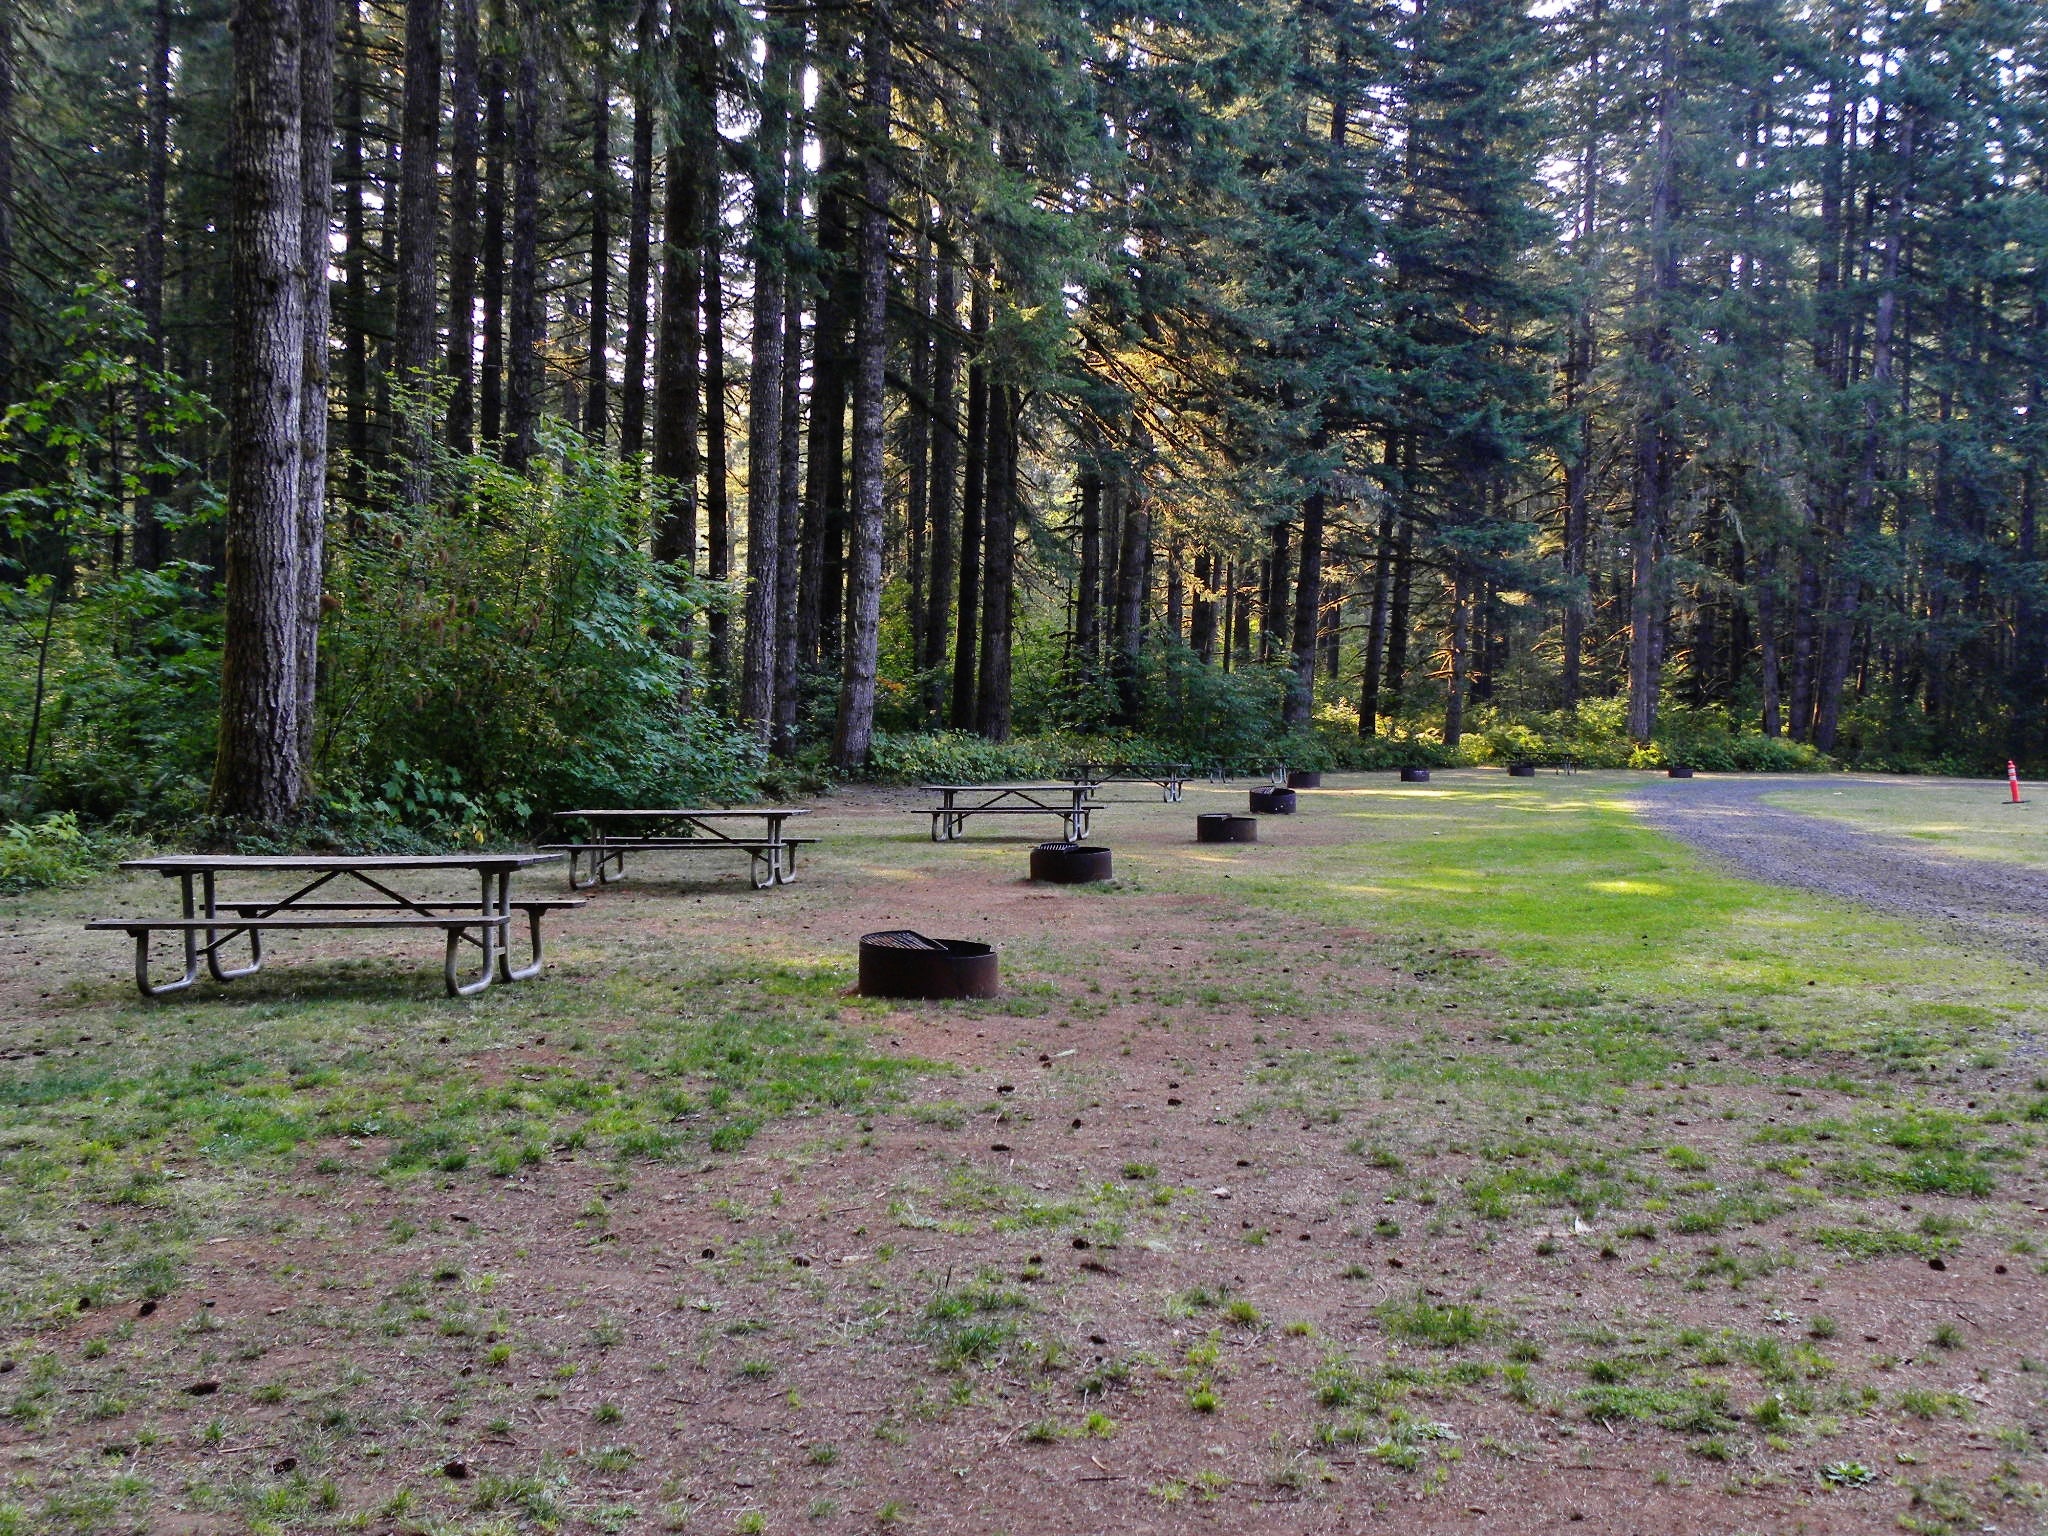 Group Camping Area (before the crowds came in)